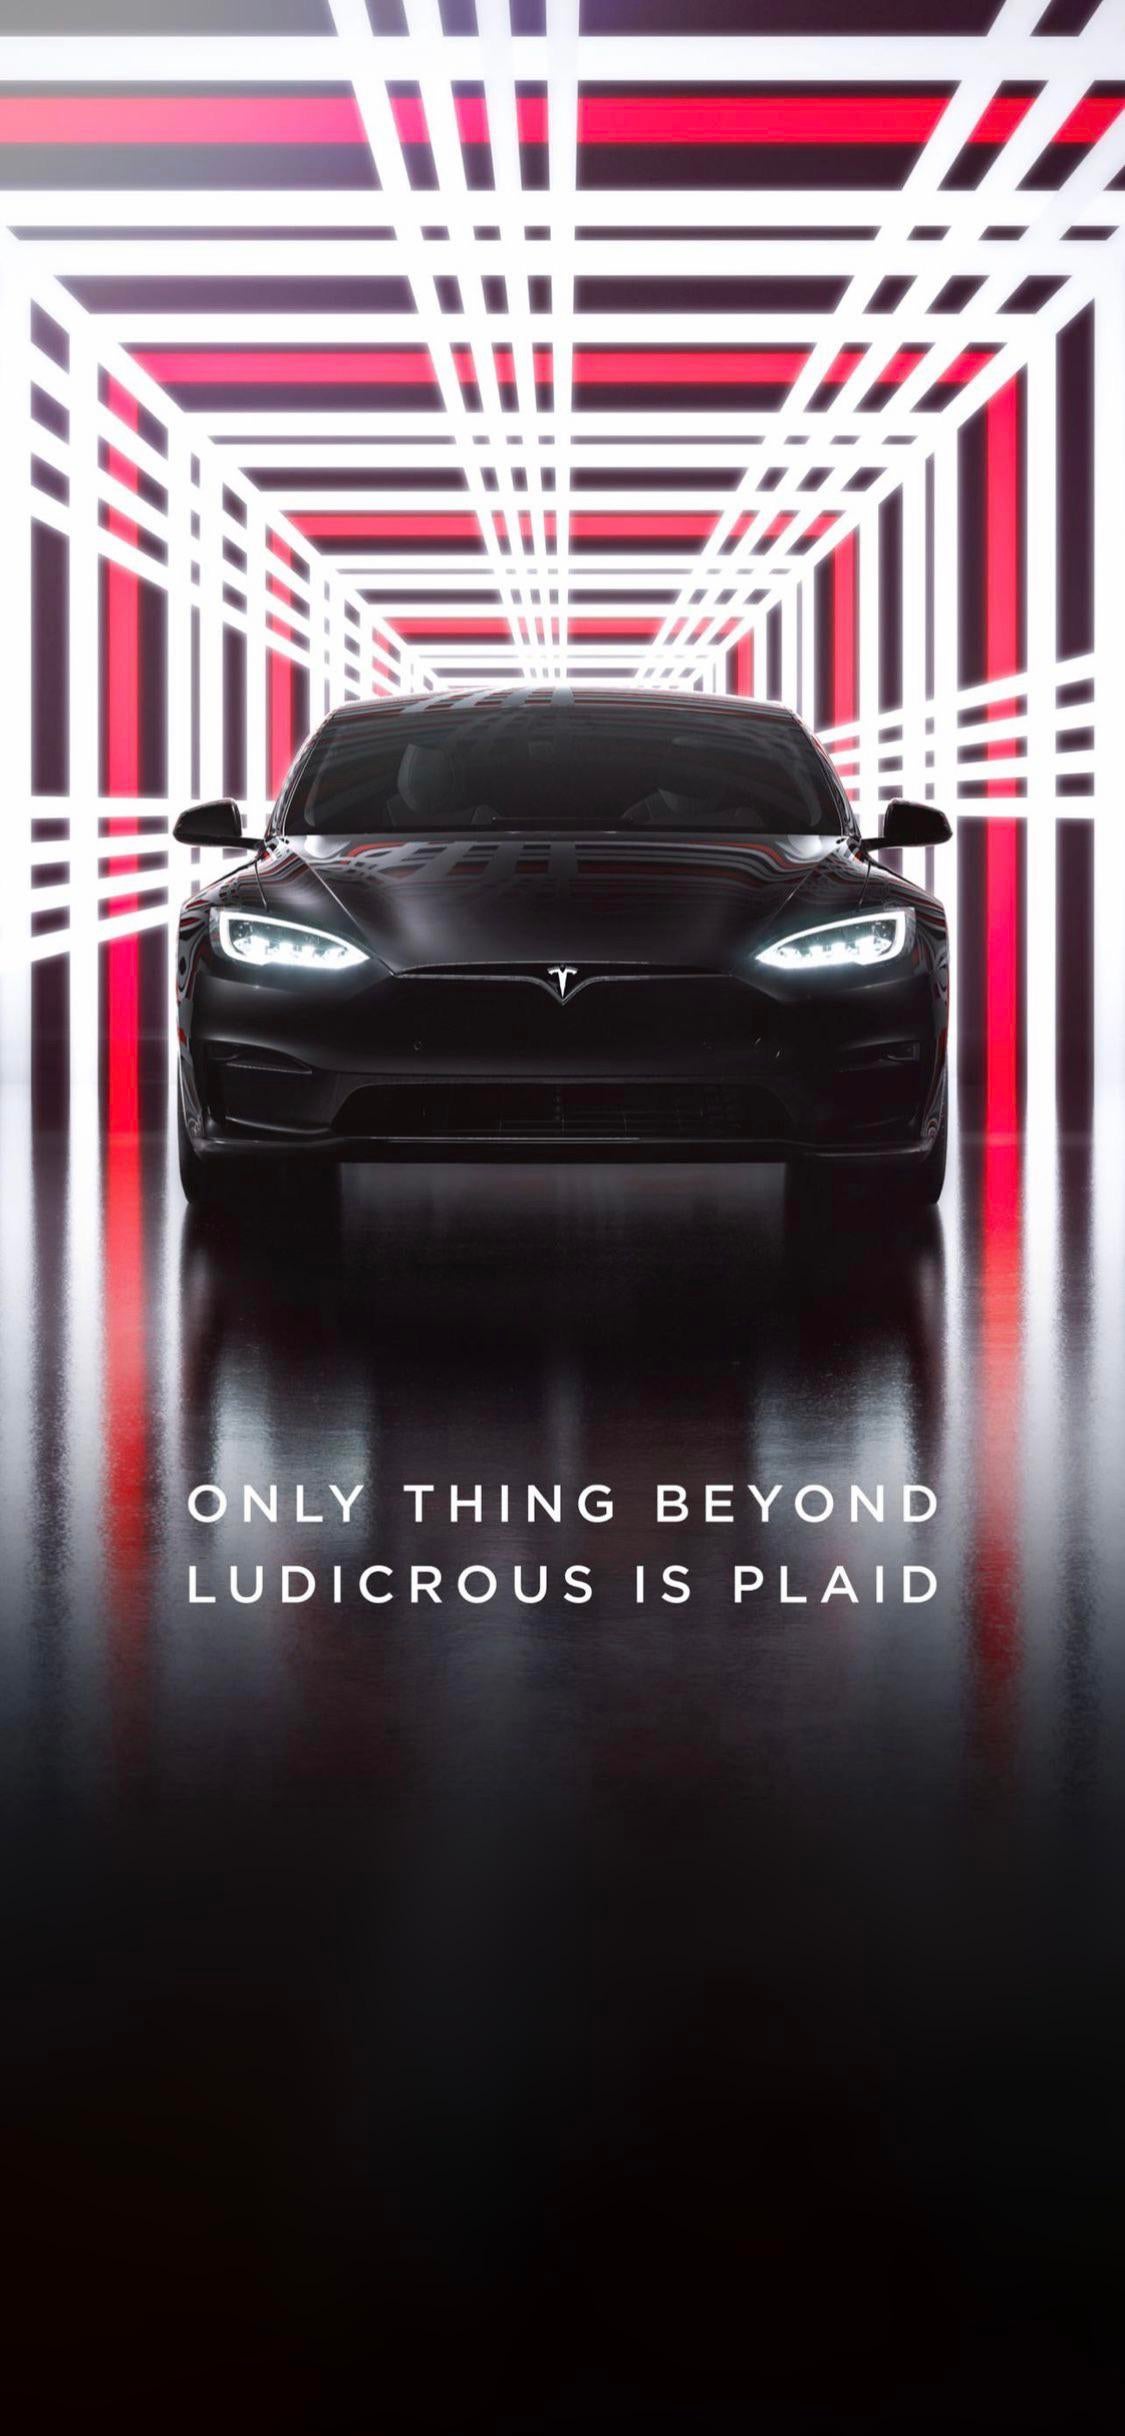 I Modified This Image From Tesla To Be Used As Wallpaper On My